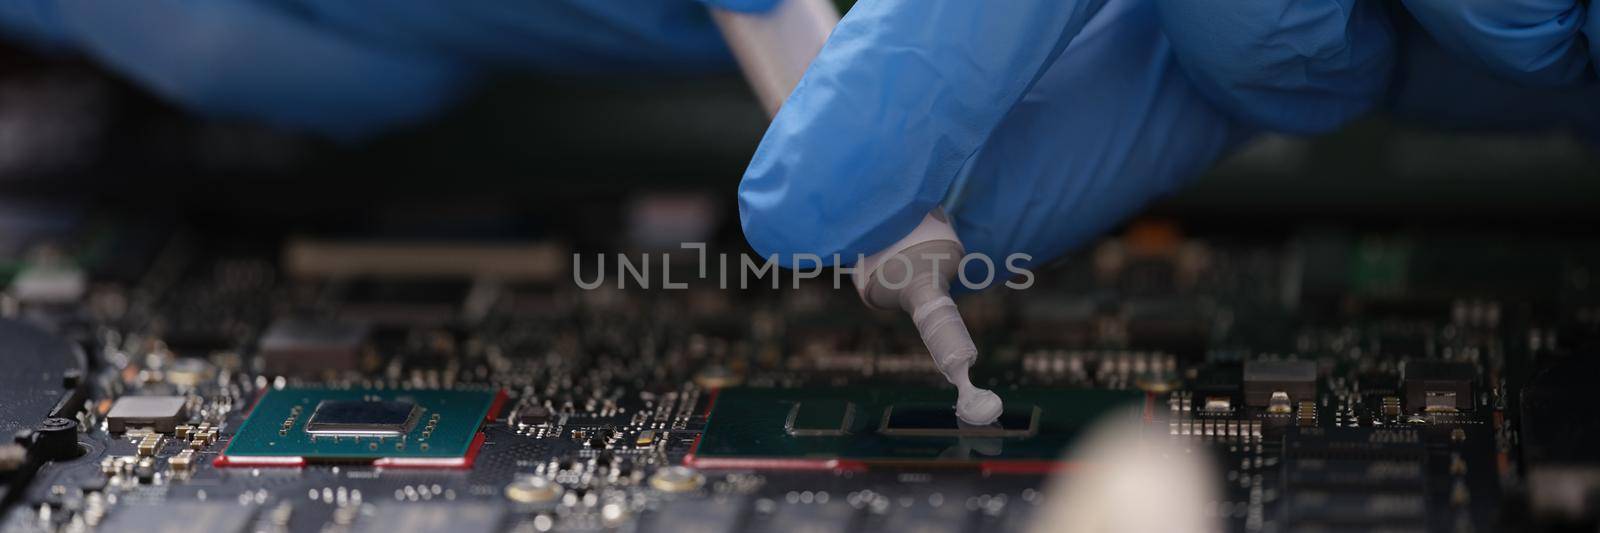 Gloved hands hold thermal paste on a laptop chip, close-up. Cleaning laptop from dust, service center